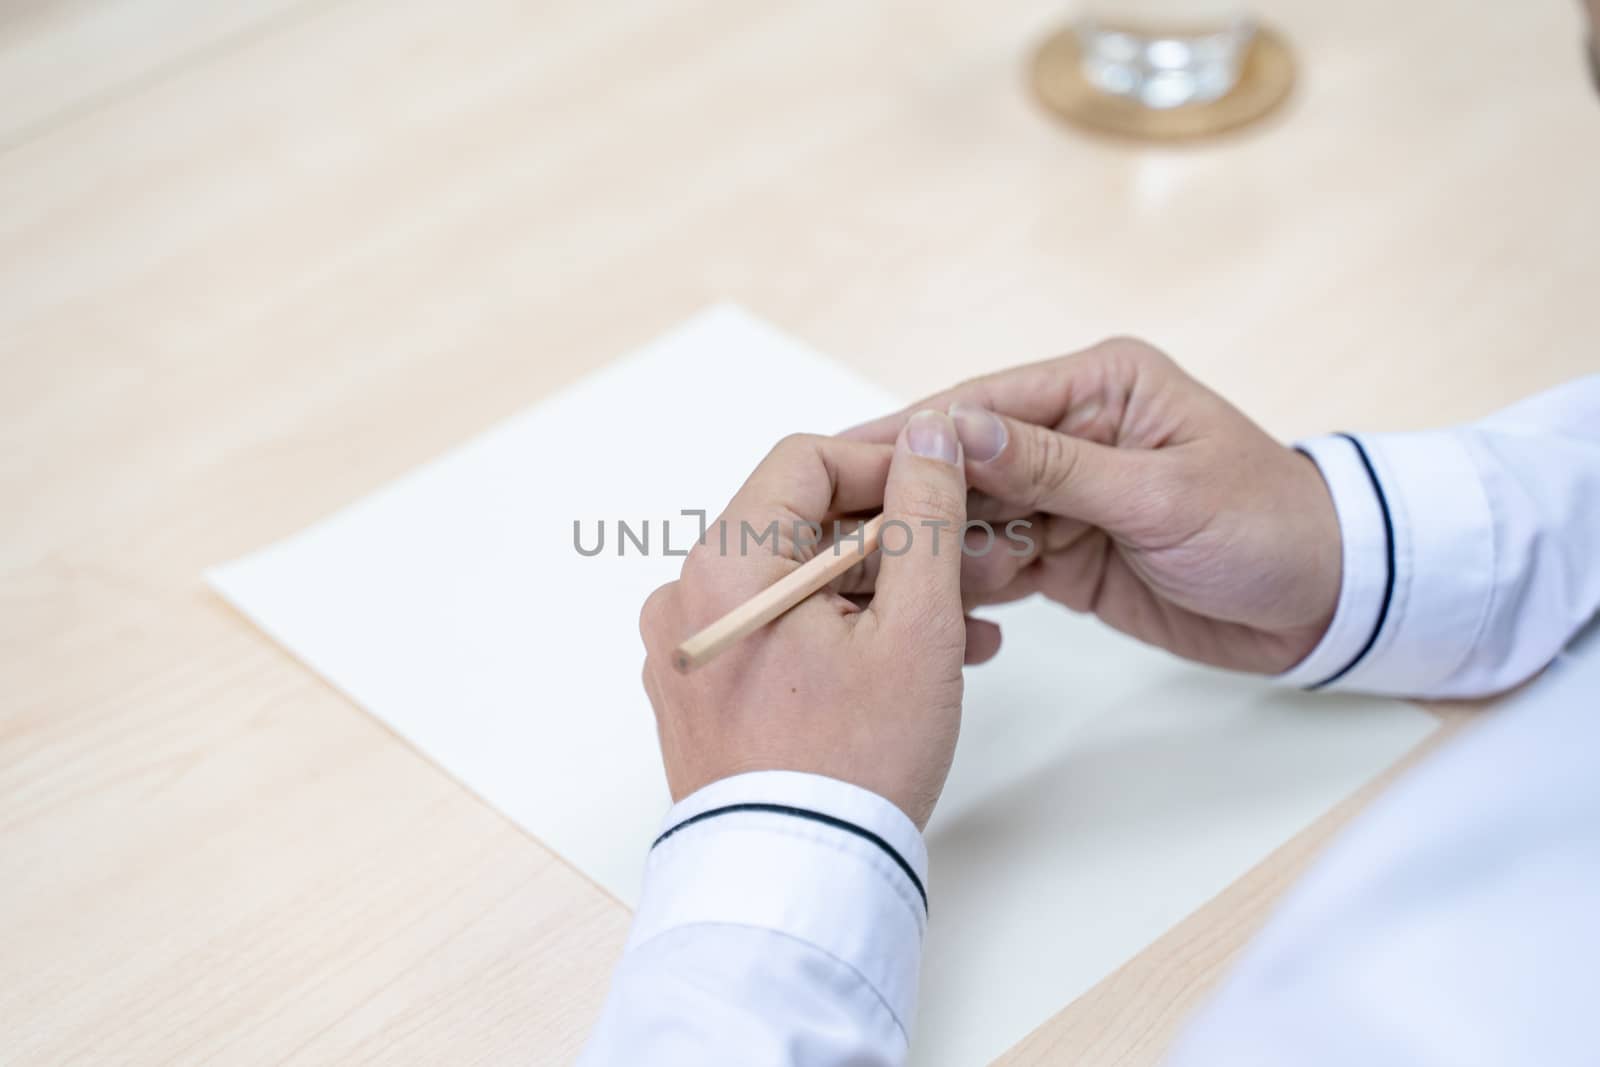 Hand image of a businessman holding a pencil on white paper, concept of working in the office.